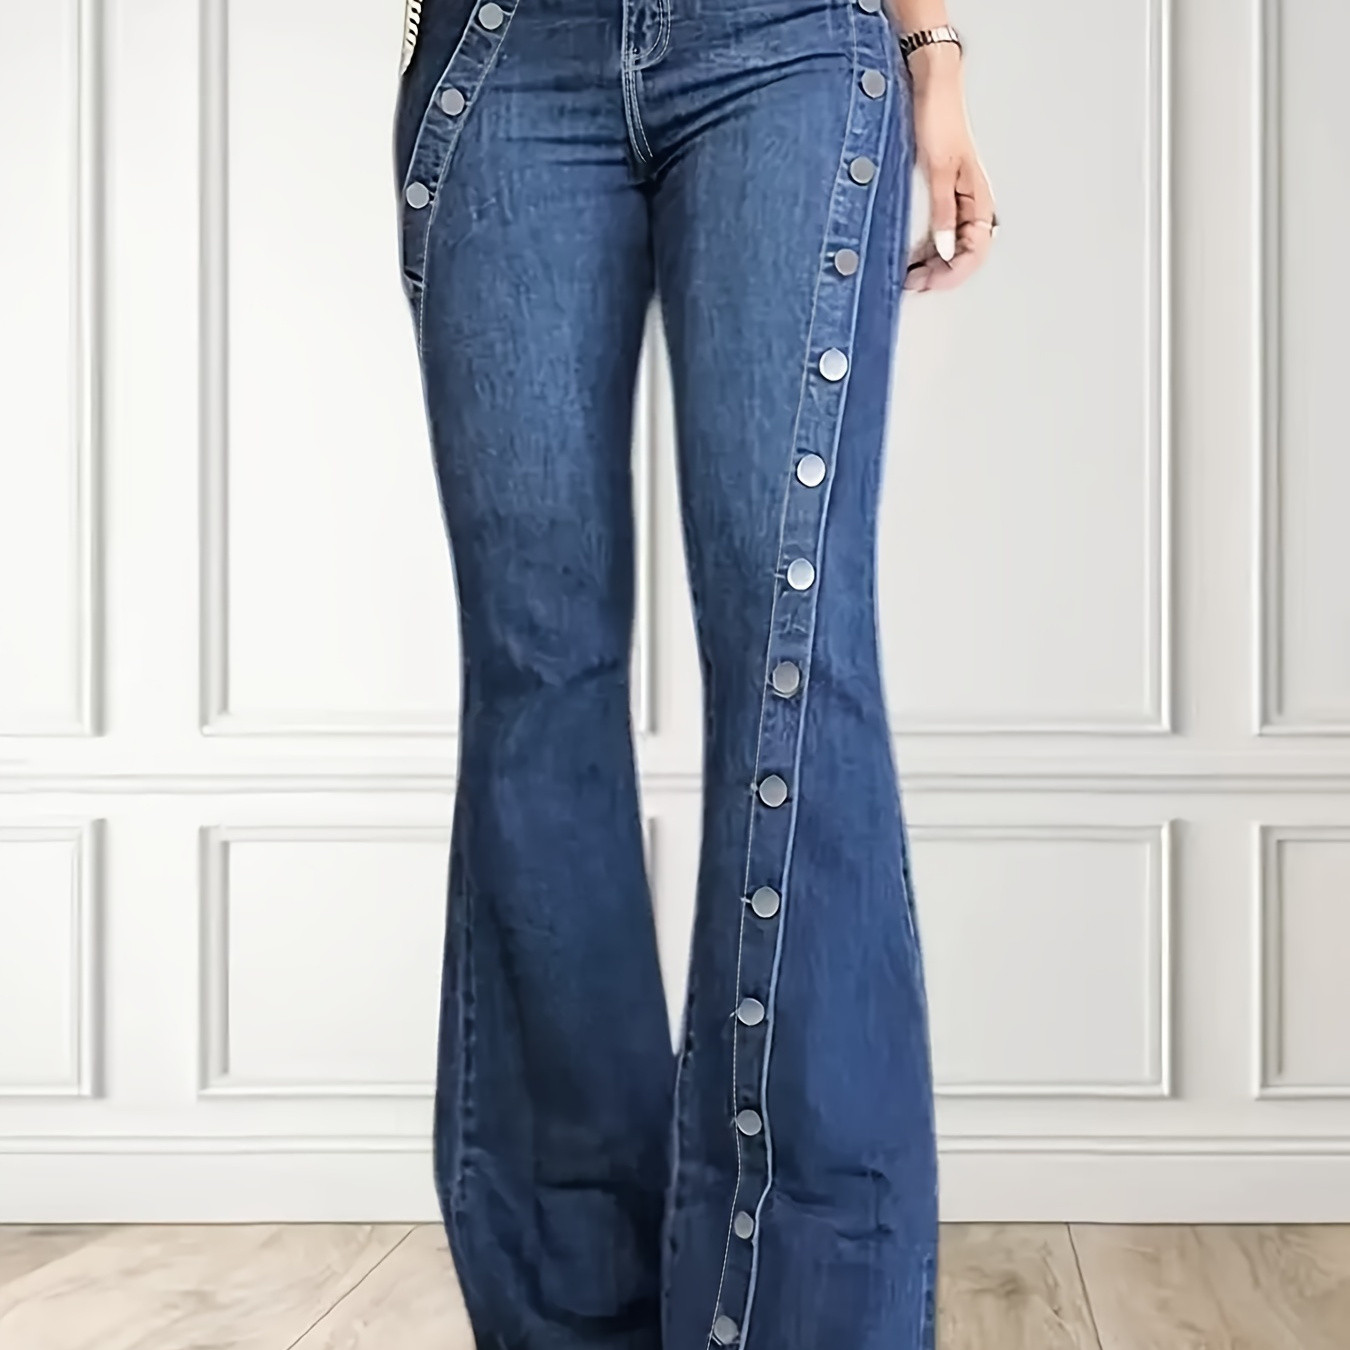 

Women's Button Decor High Waist Denim Jeans, For Autumn, Street Style Button Fly Flared Pants For Everyday Wear